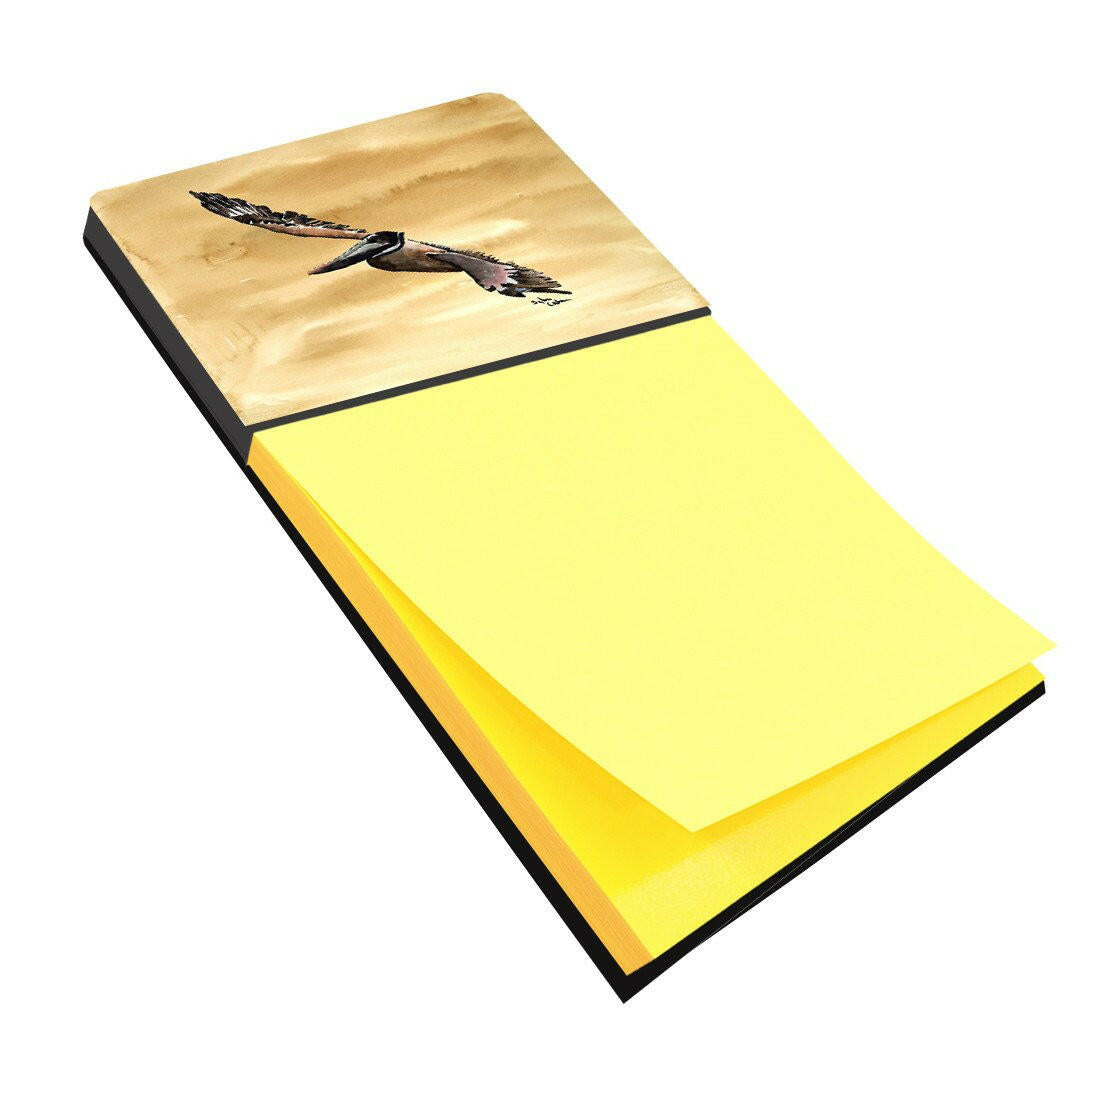 Flying Brown Pelican Refiillable Sticky Note Holder or Postit Note Dispenser 8157SN by Caroline's Treasures